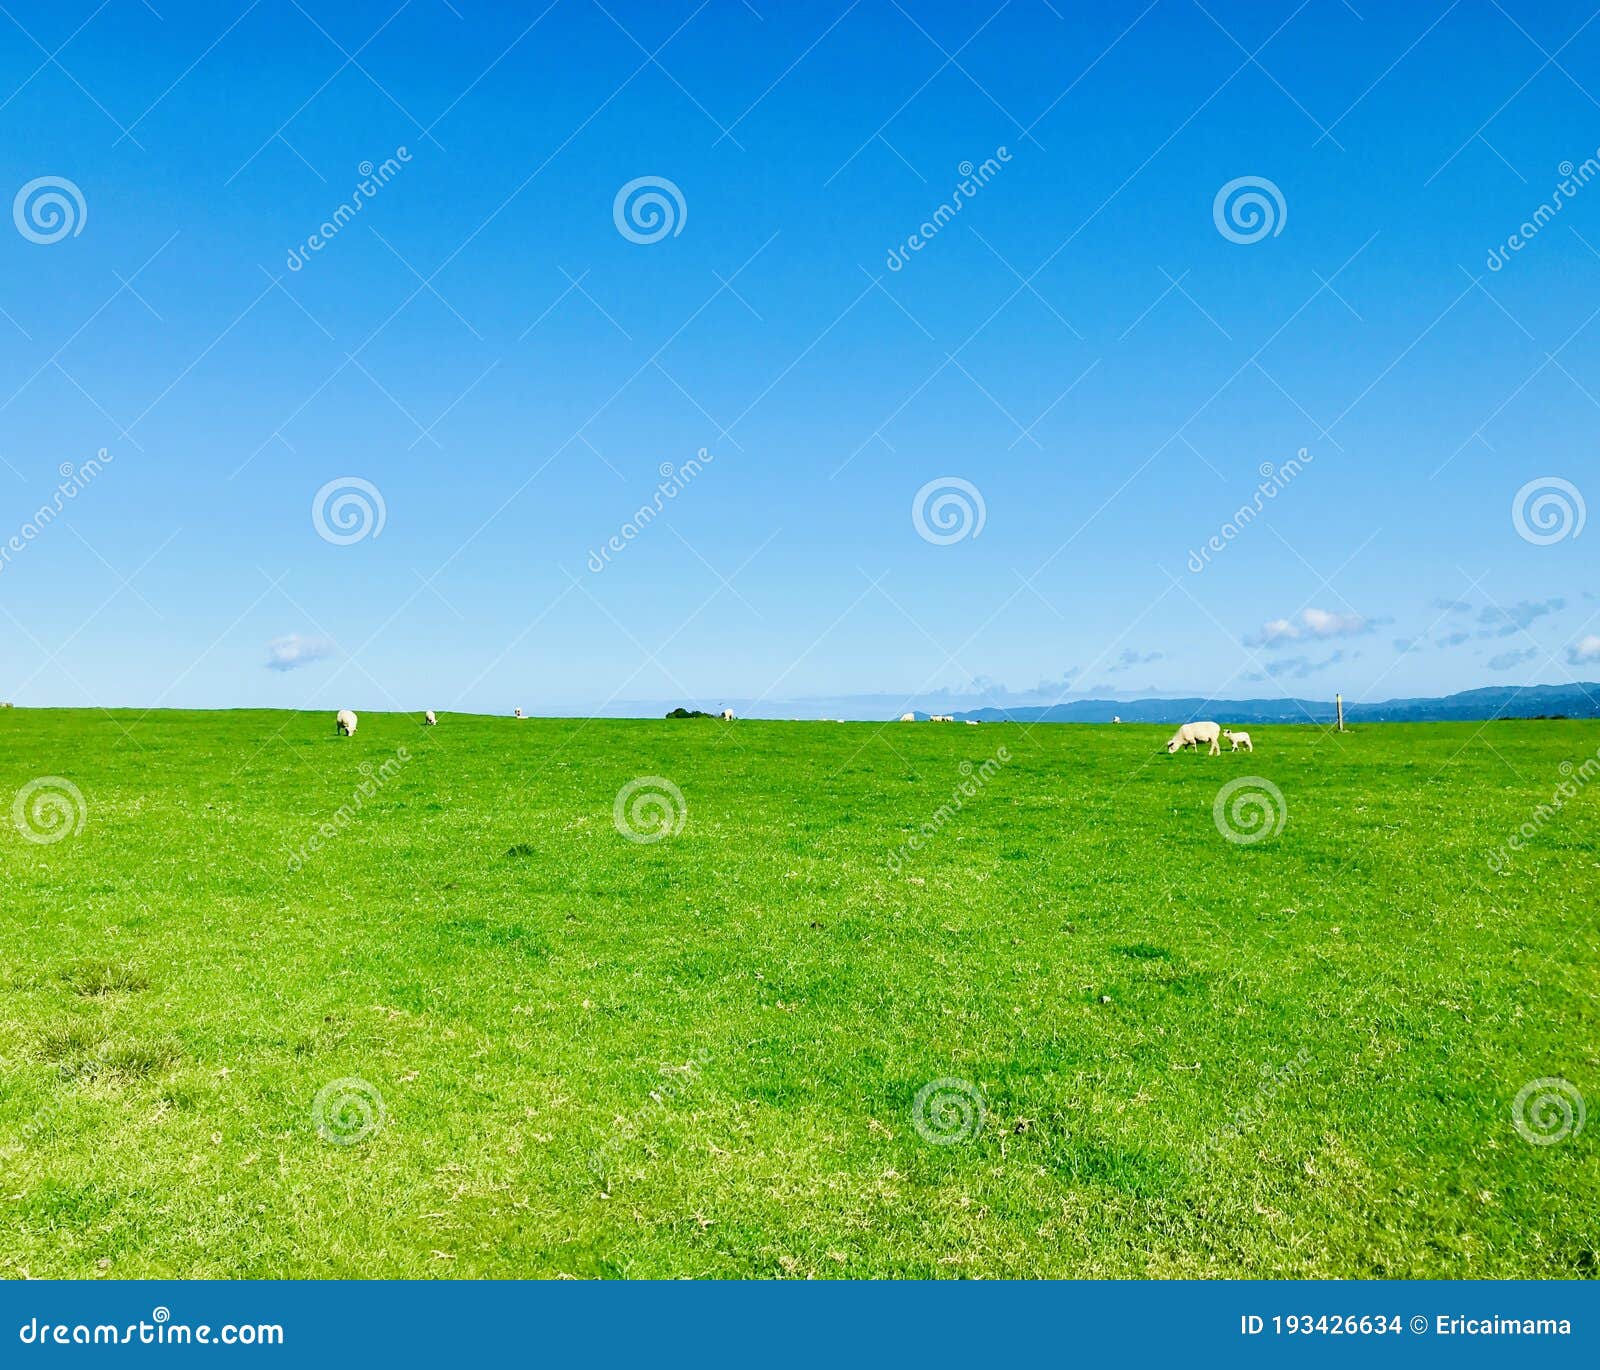 white sheeps, blue sky and green grass under sunshiny day.